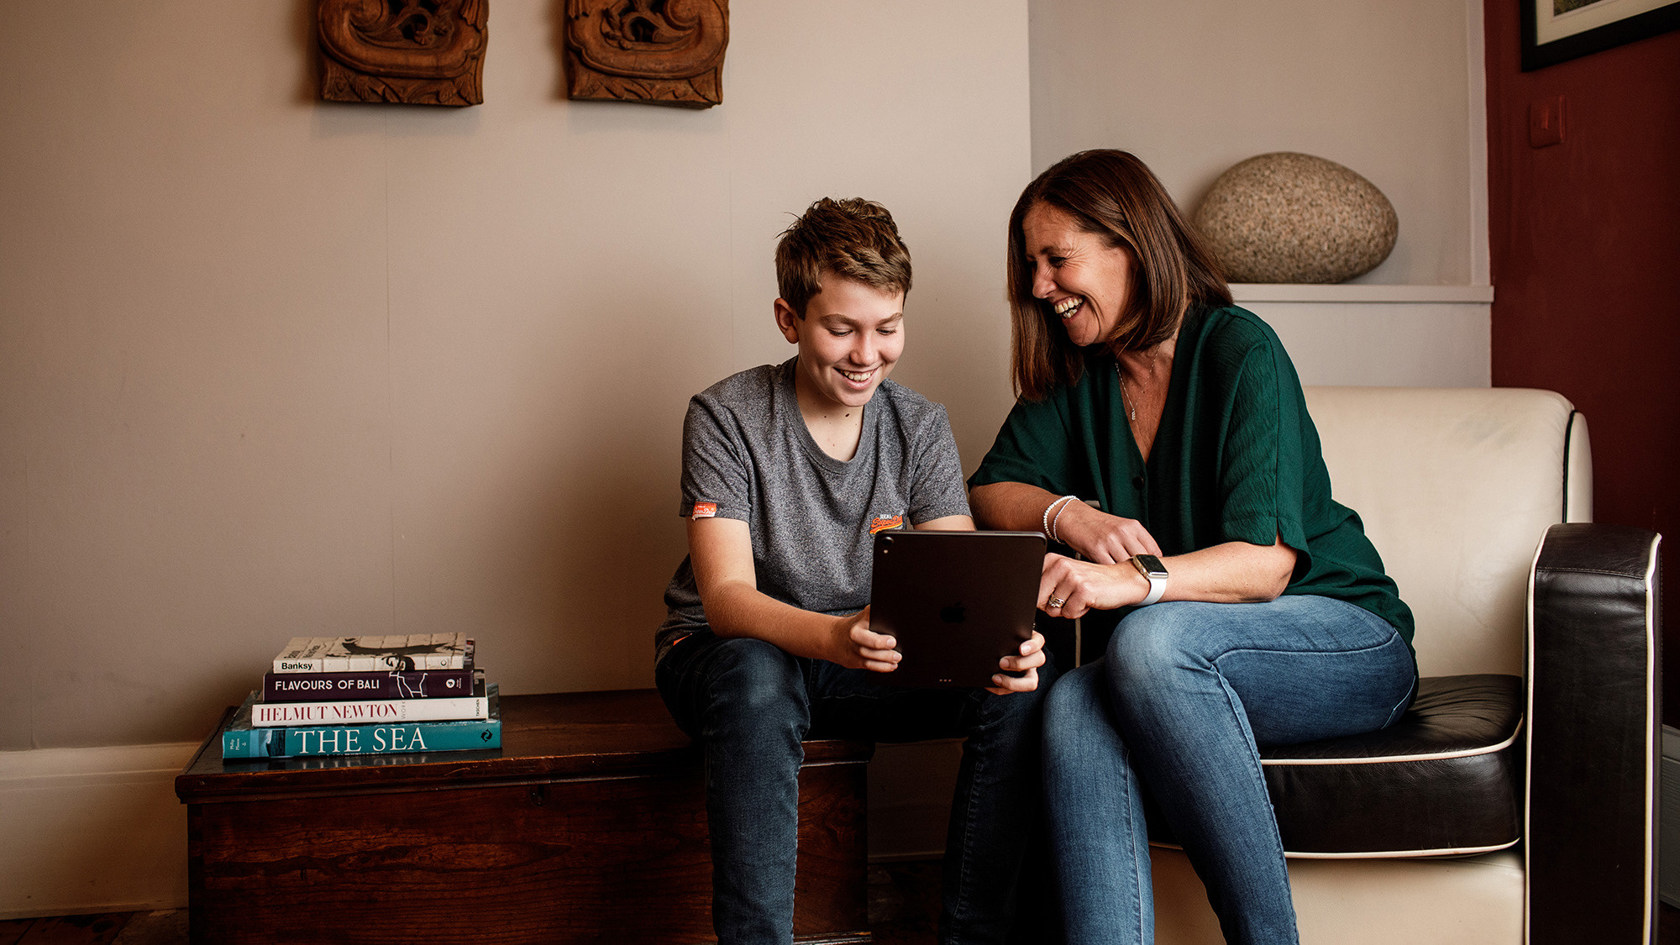 A mother and son laugh together over something they've seen on a tablet.